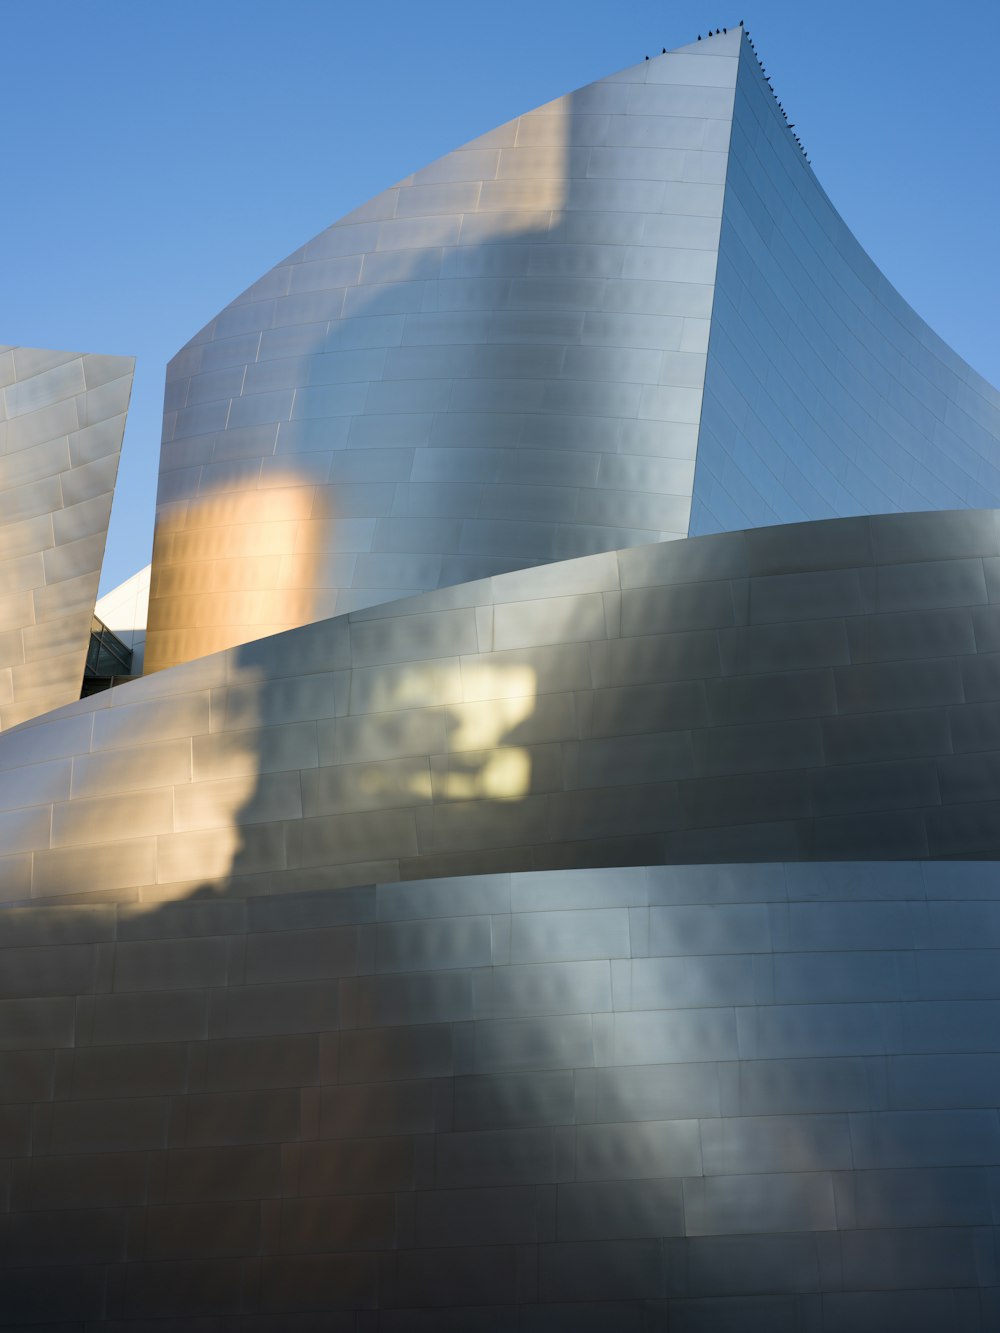 a large pyramid with a blue sky with Walt Disney Concert Hall in the background